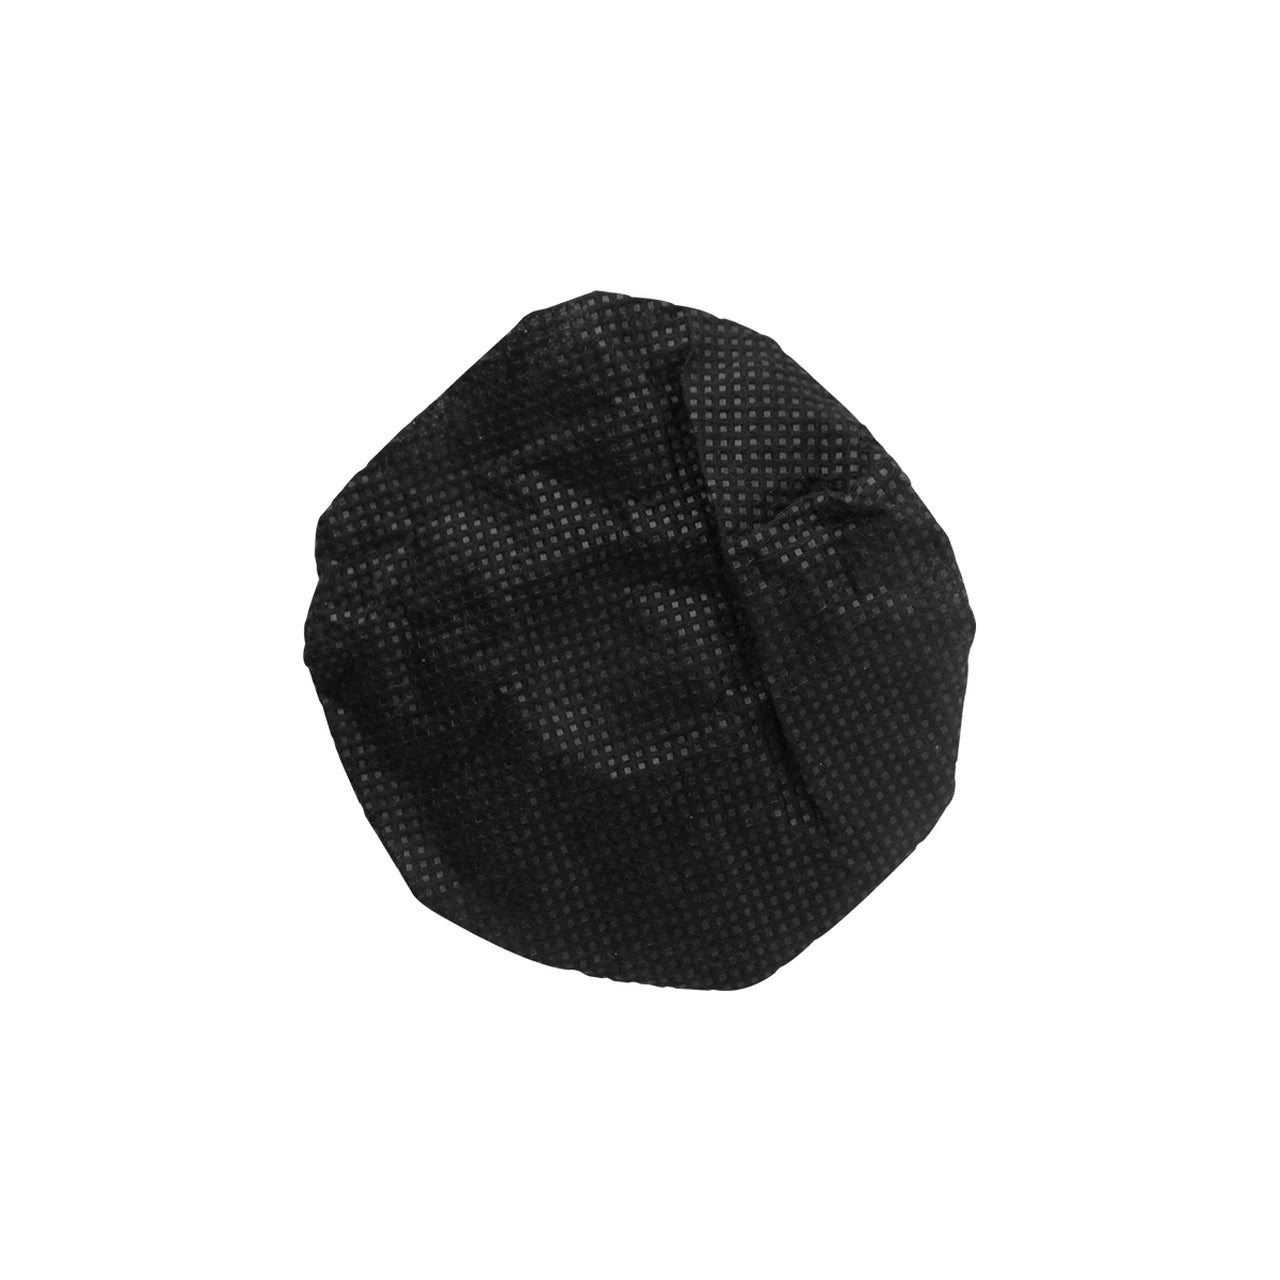 HamiltonBuhl Disposable Ear Cushion Covers, Black, 4.5 in. Deluxe, Black - 50 Pair